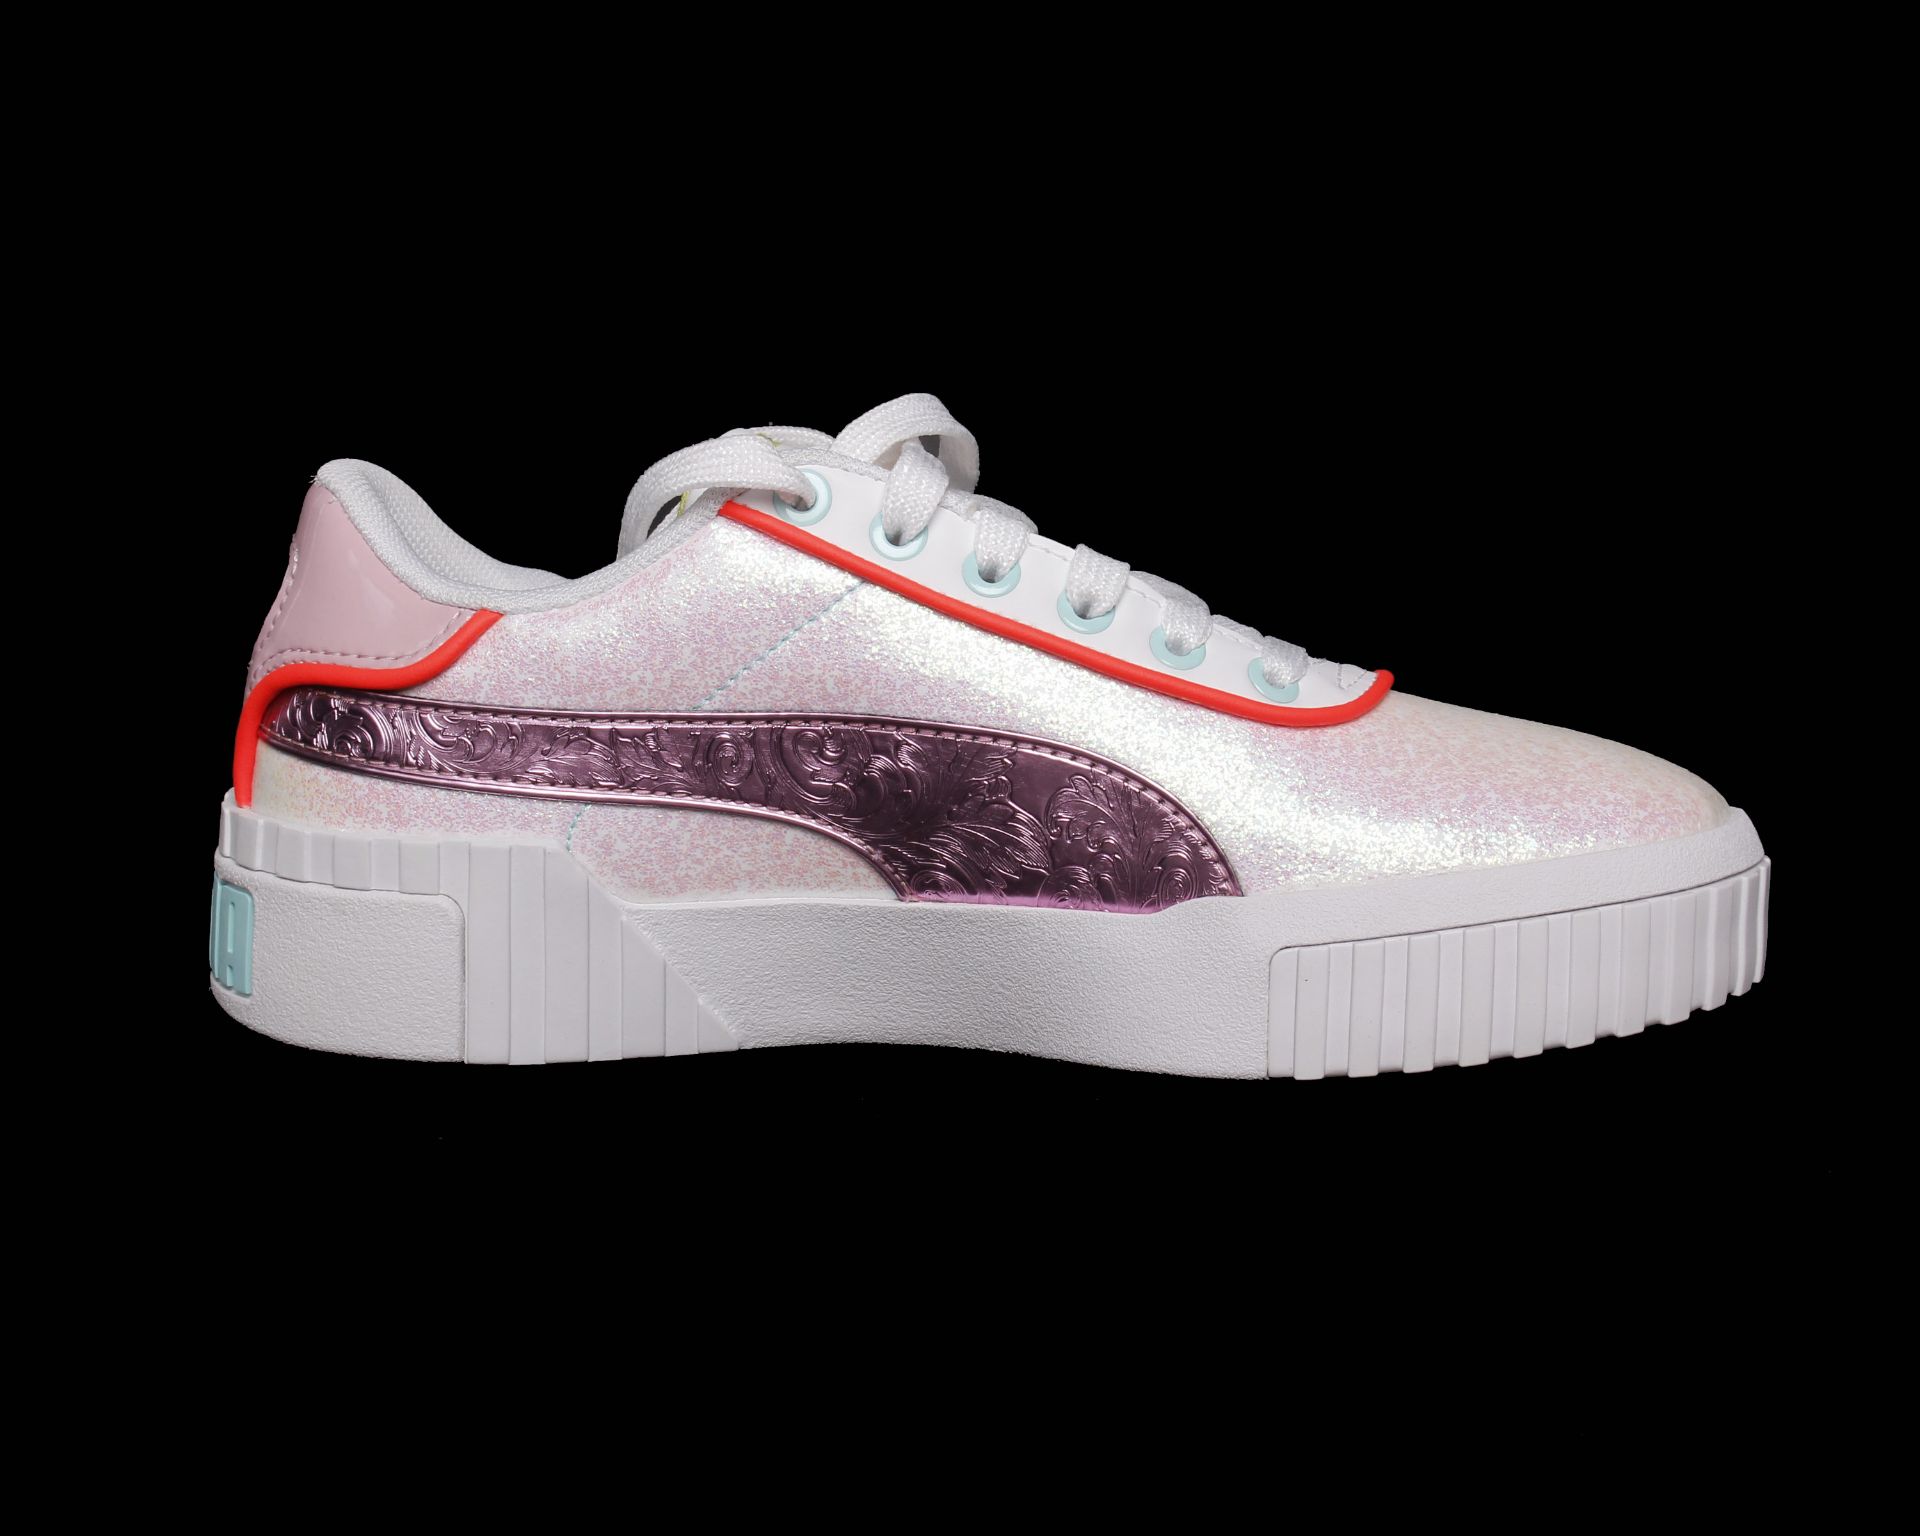 A pair of women's as new Puma Sophia Webster Cali trainers (UK 3.5). - Image 6 of 6